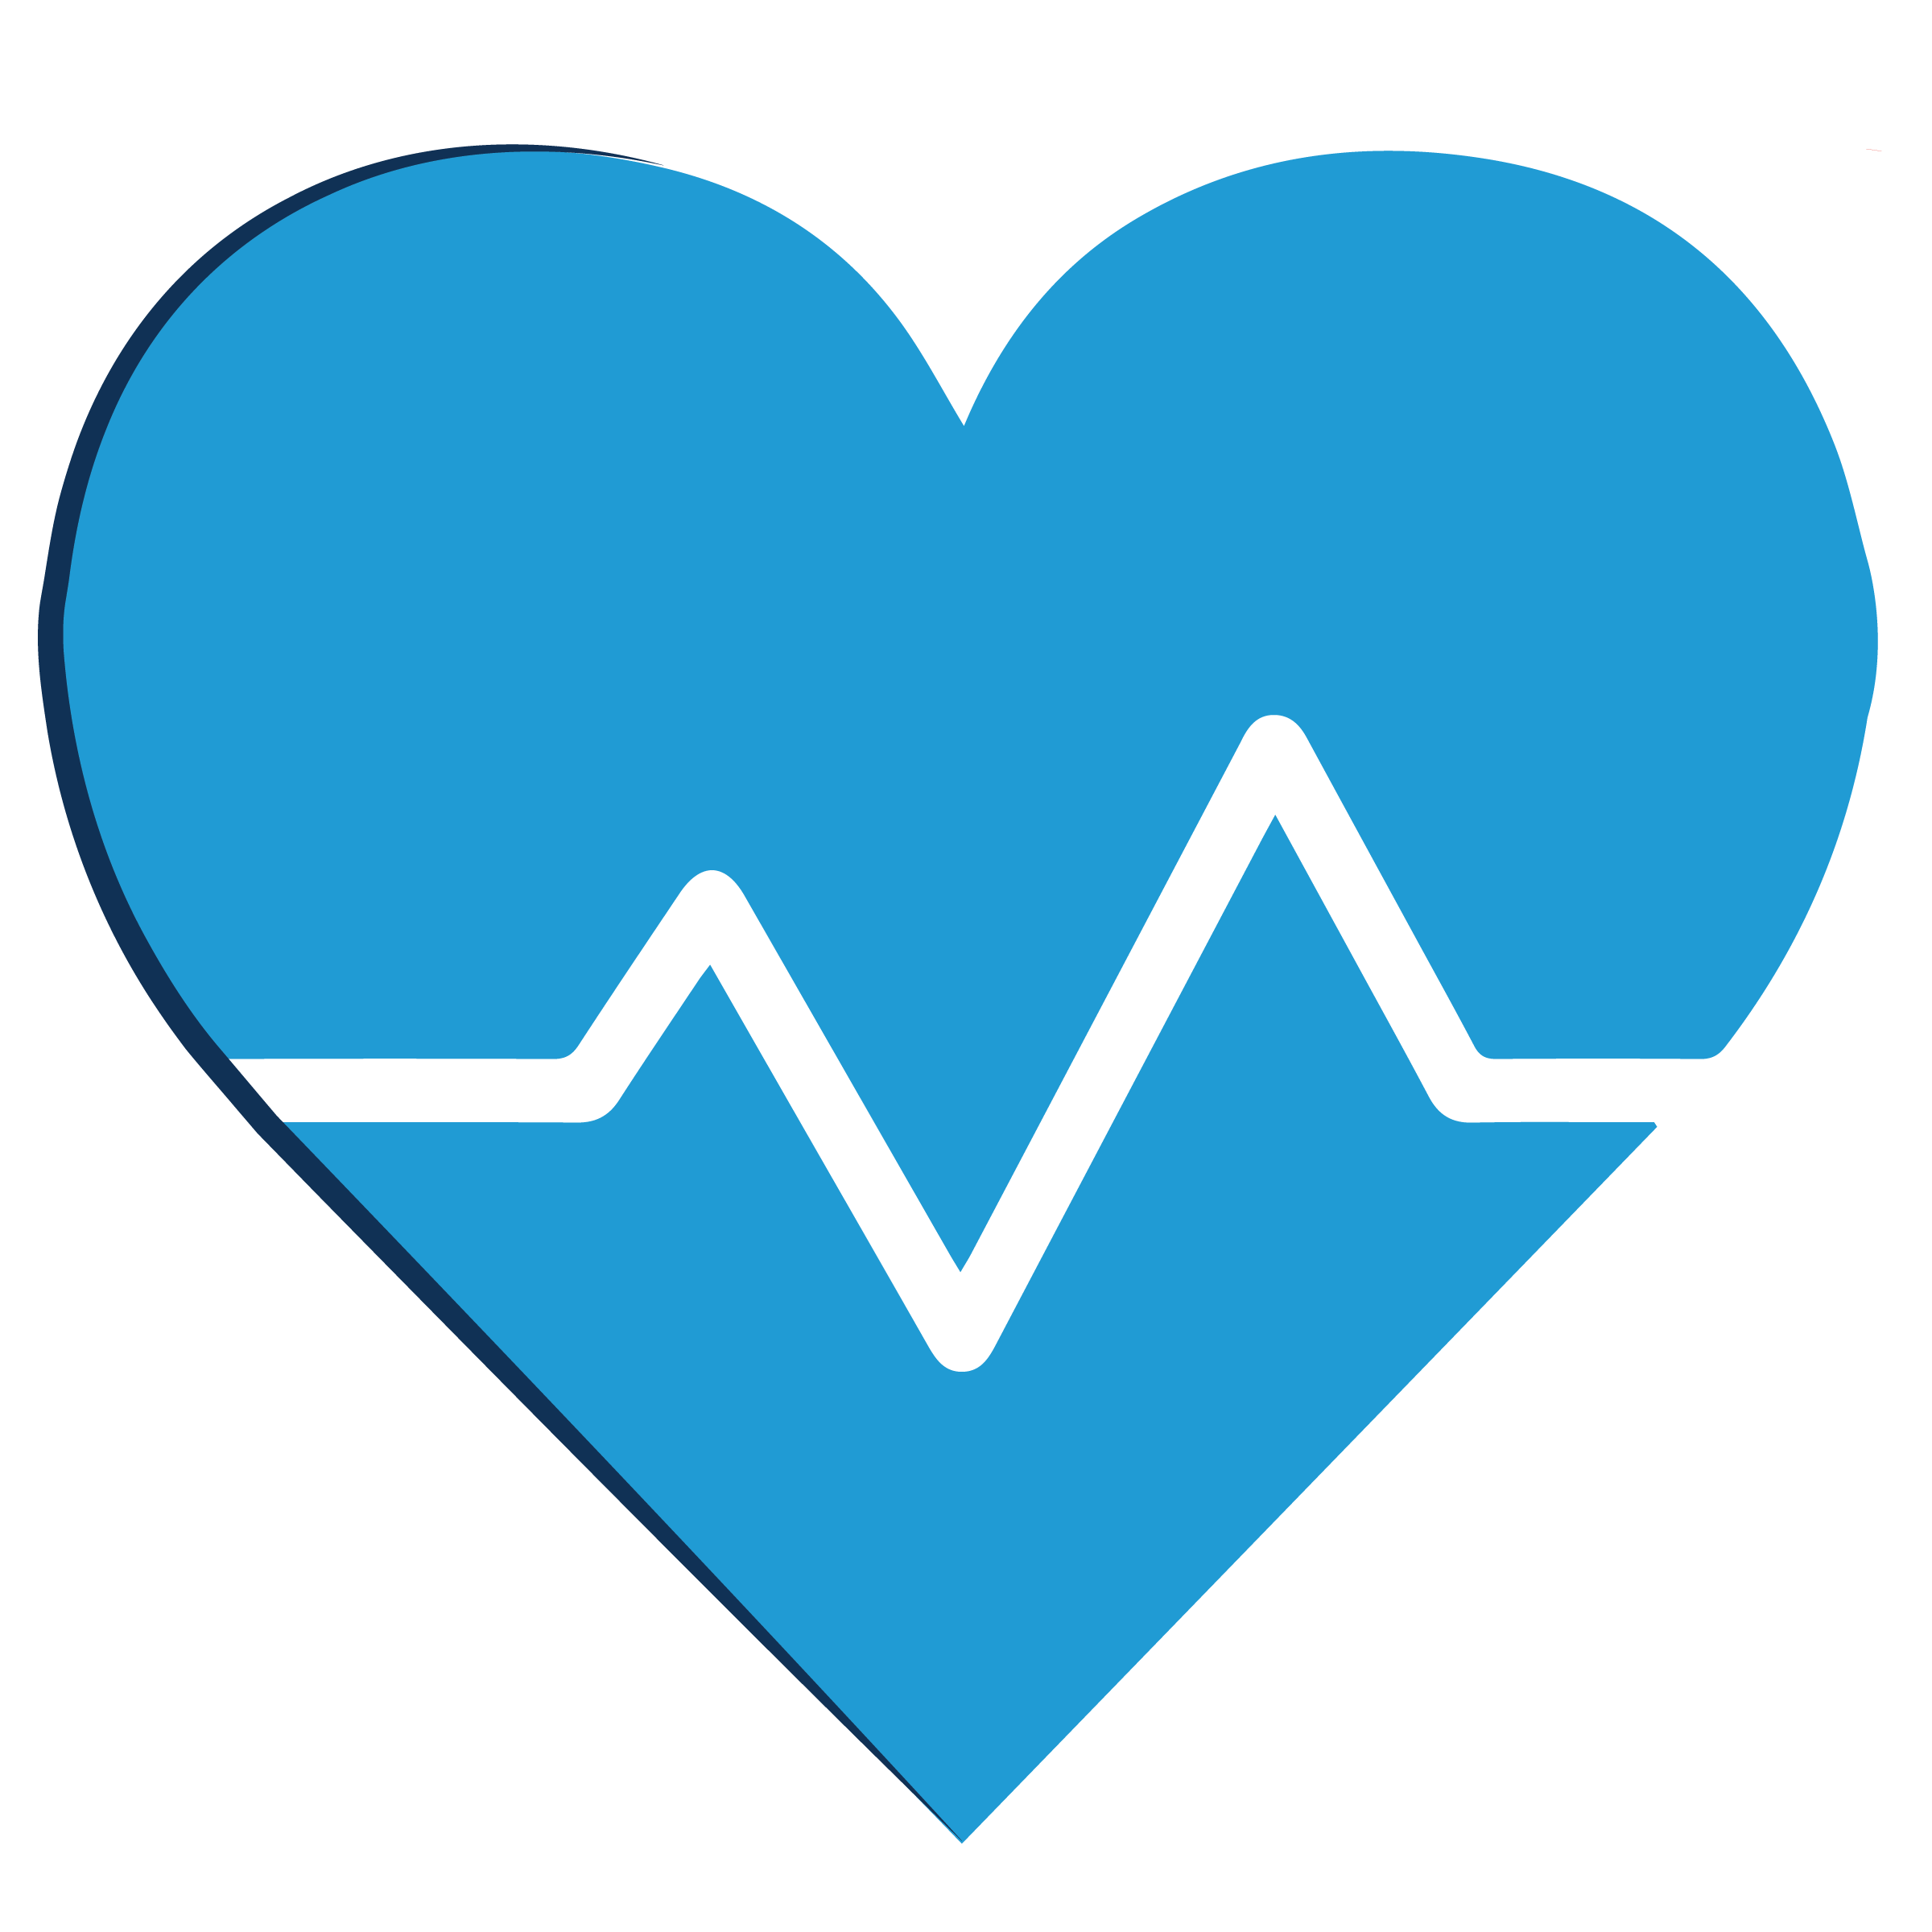 icon of heart with EKG lines inside